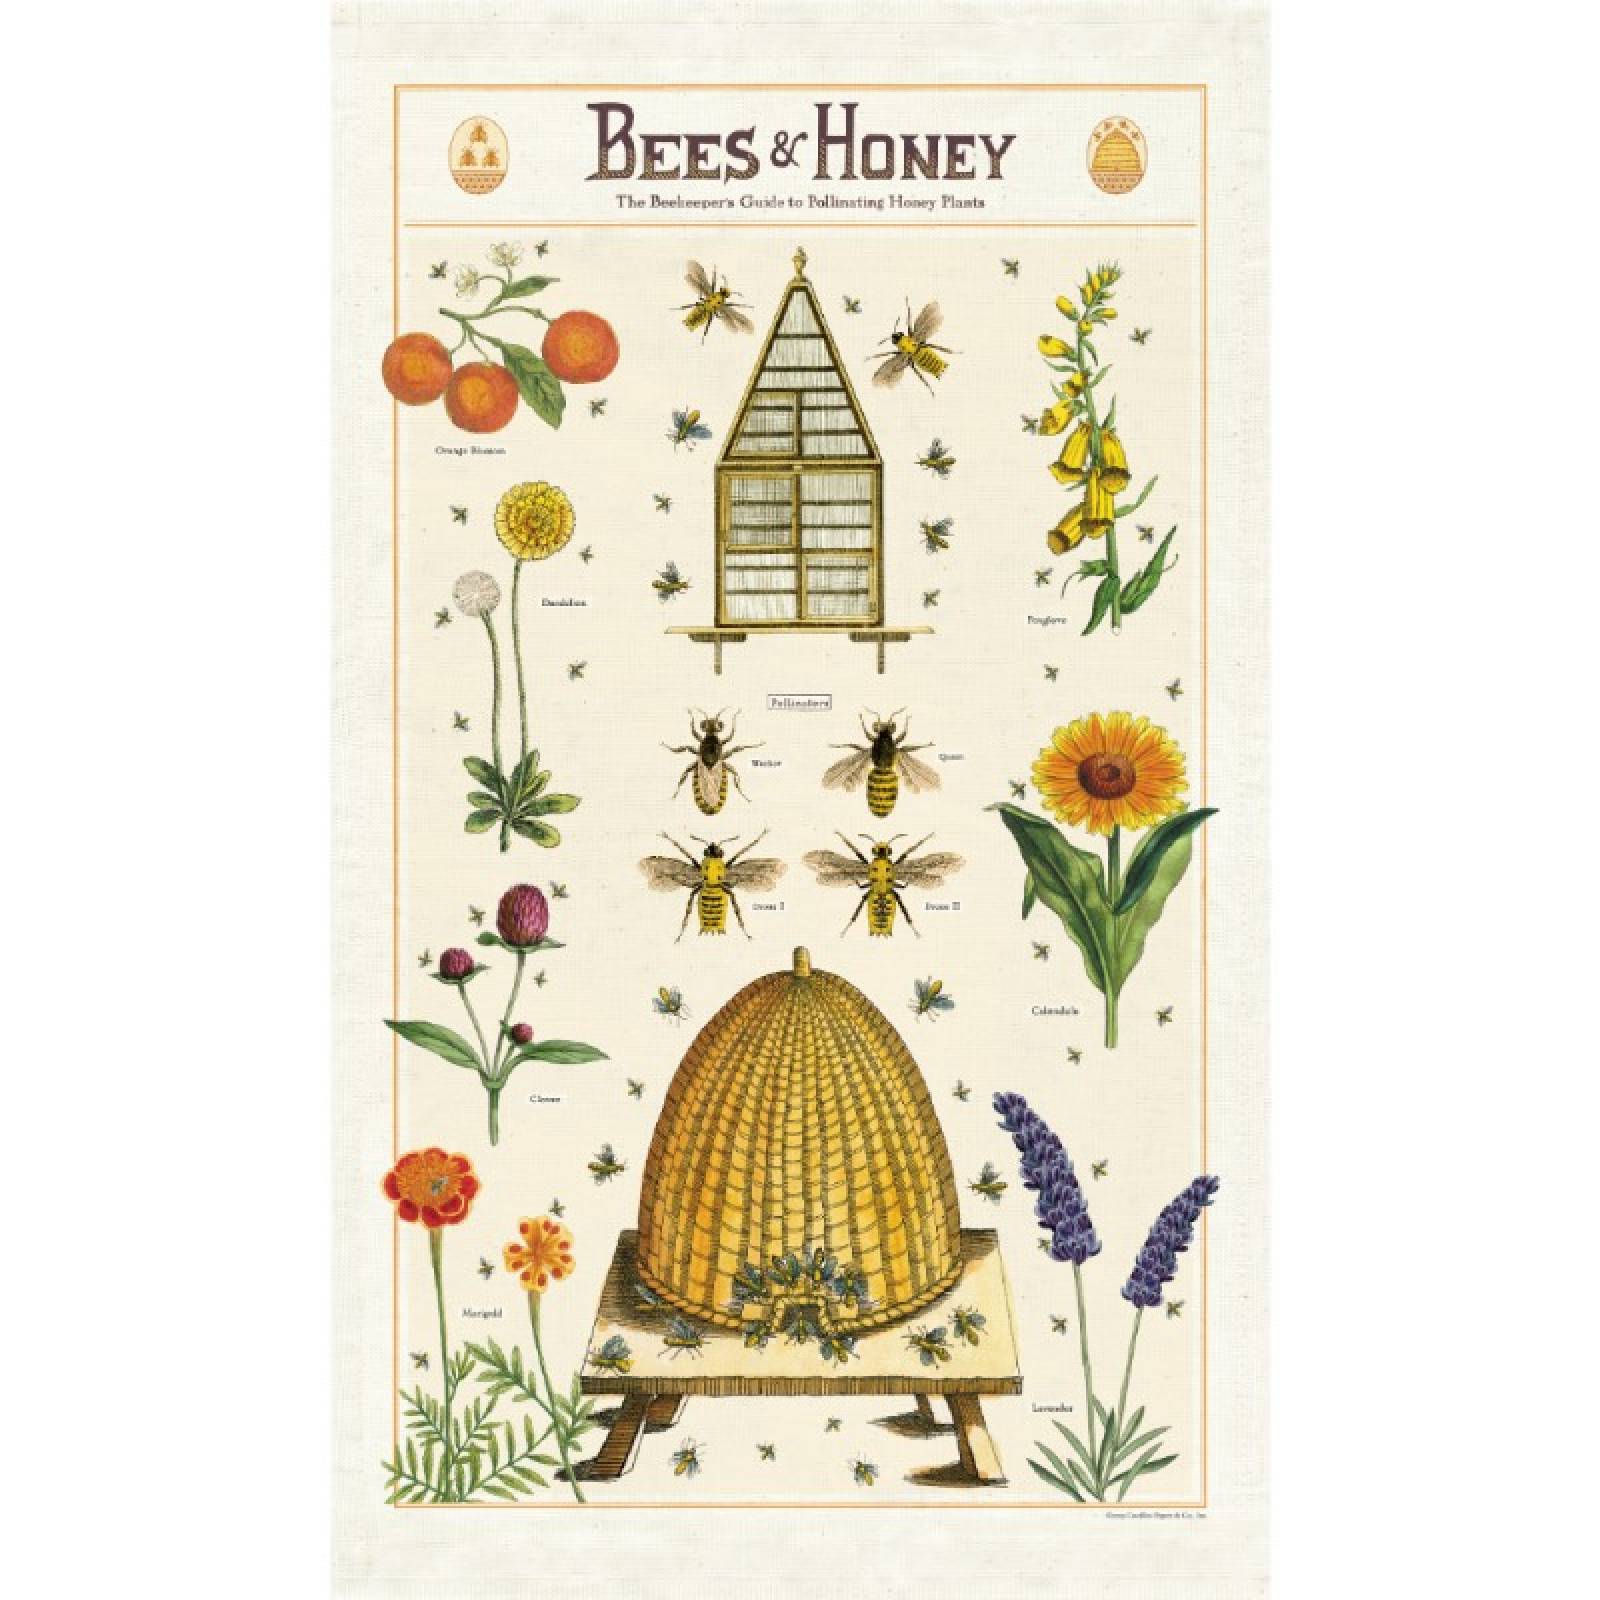 Bees & Honey Cotton Tea Towel With Gift Bag